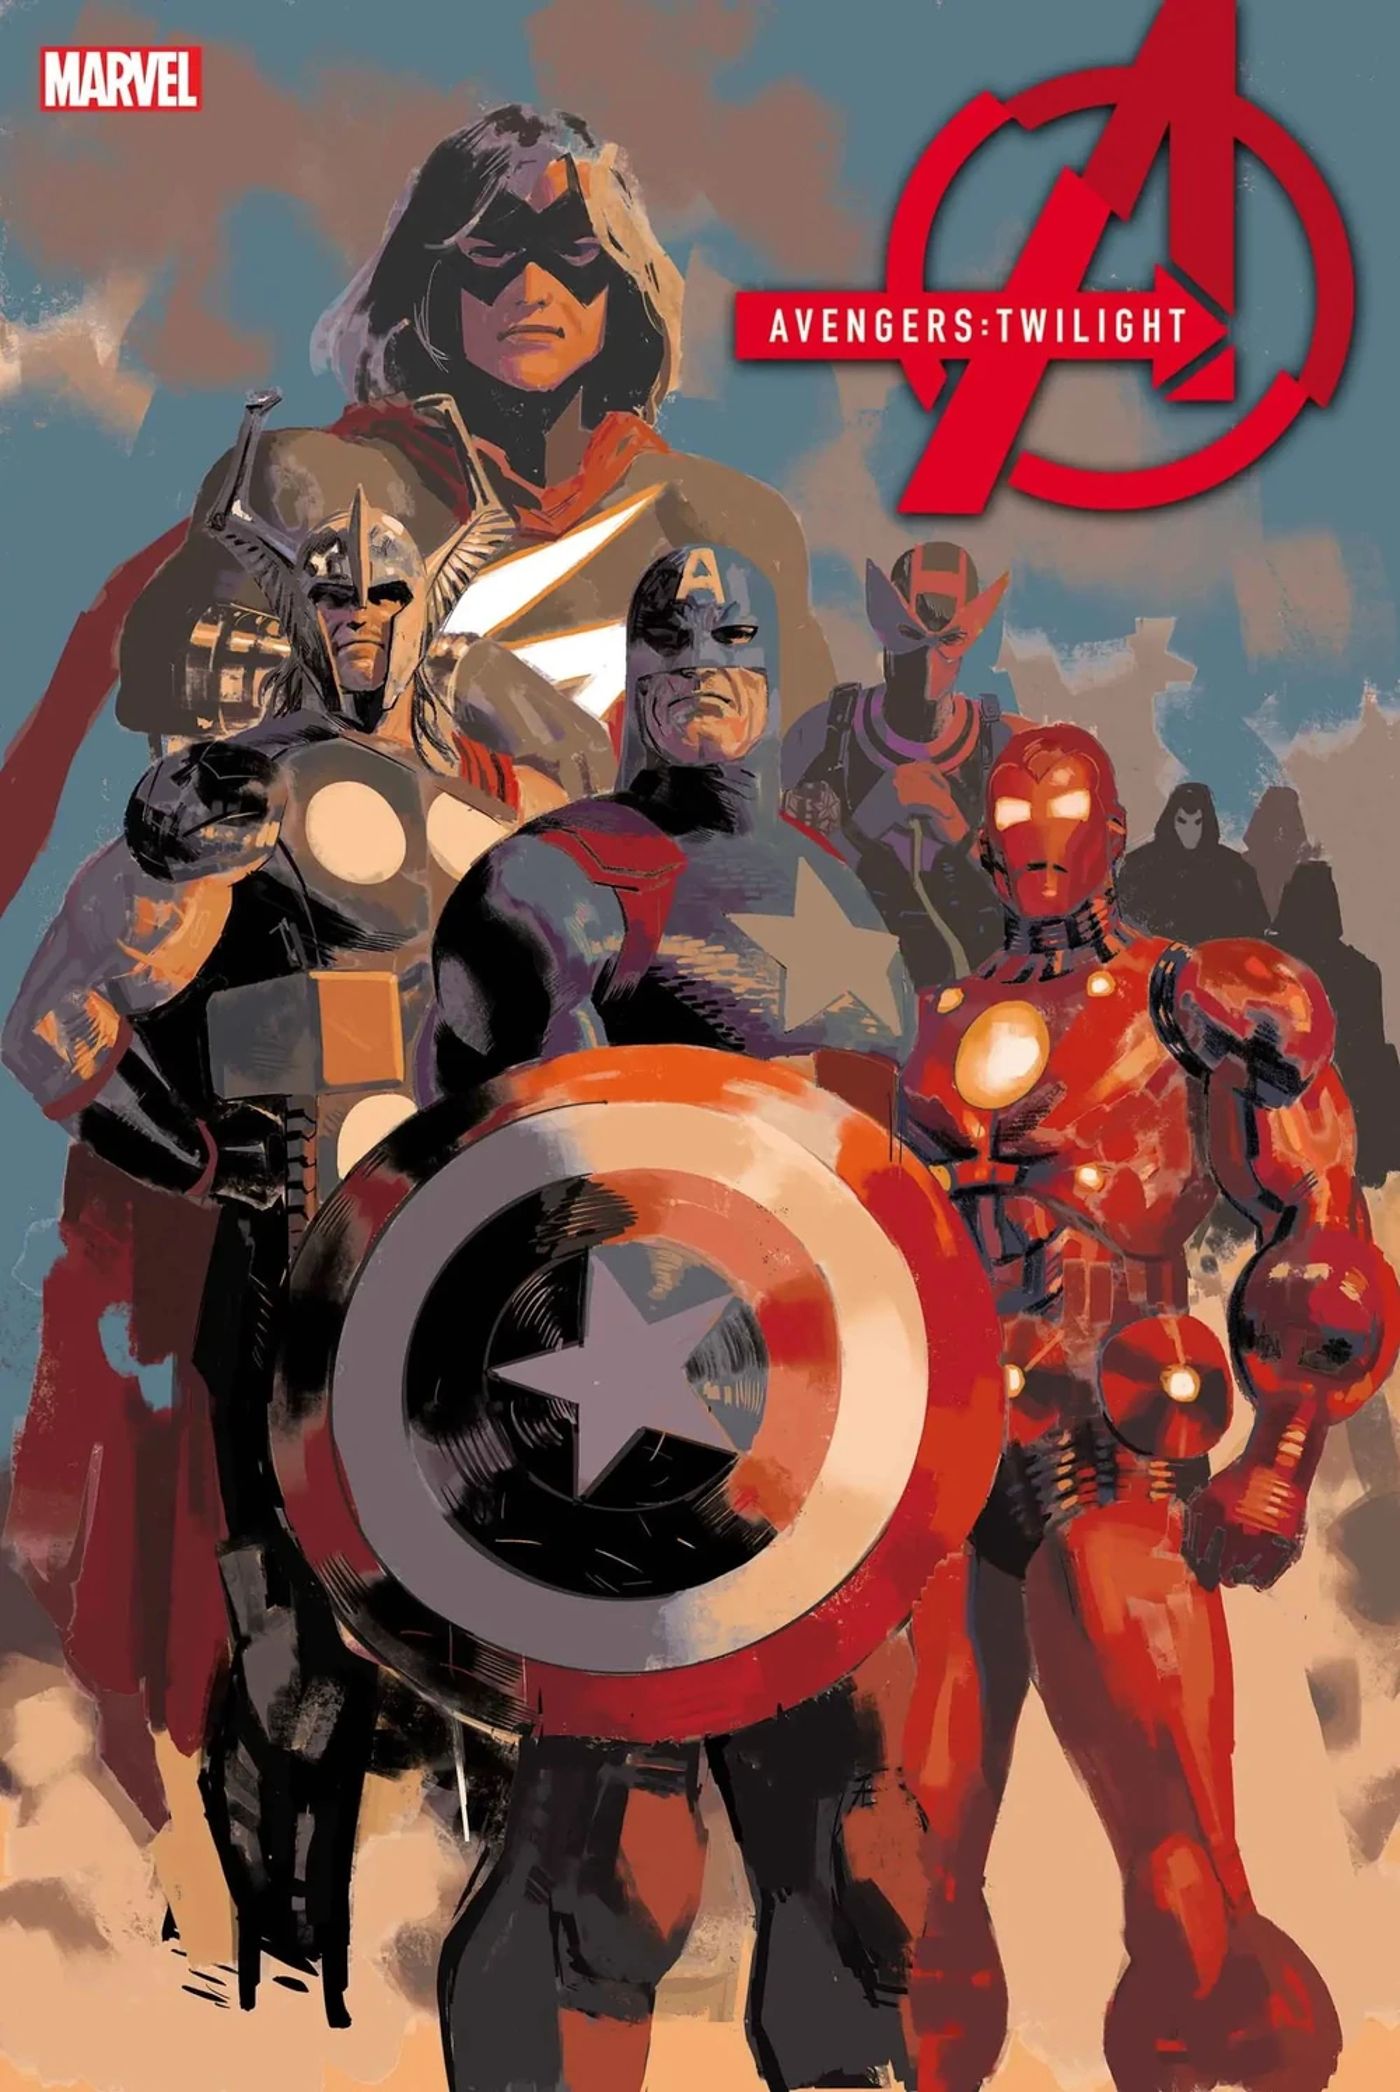 Future Avengers Roster Revealed, as Iron Man’s Son Joins Captain America’s Team